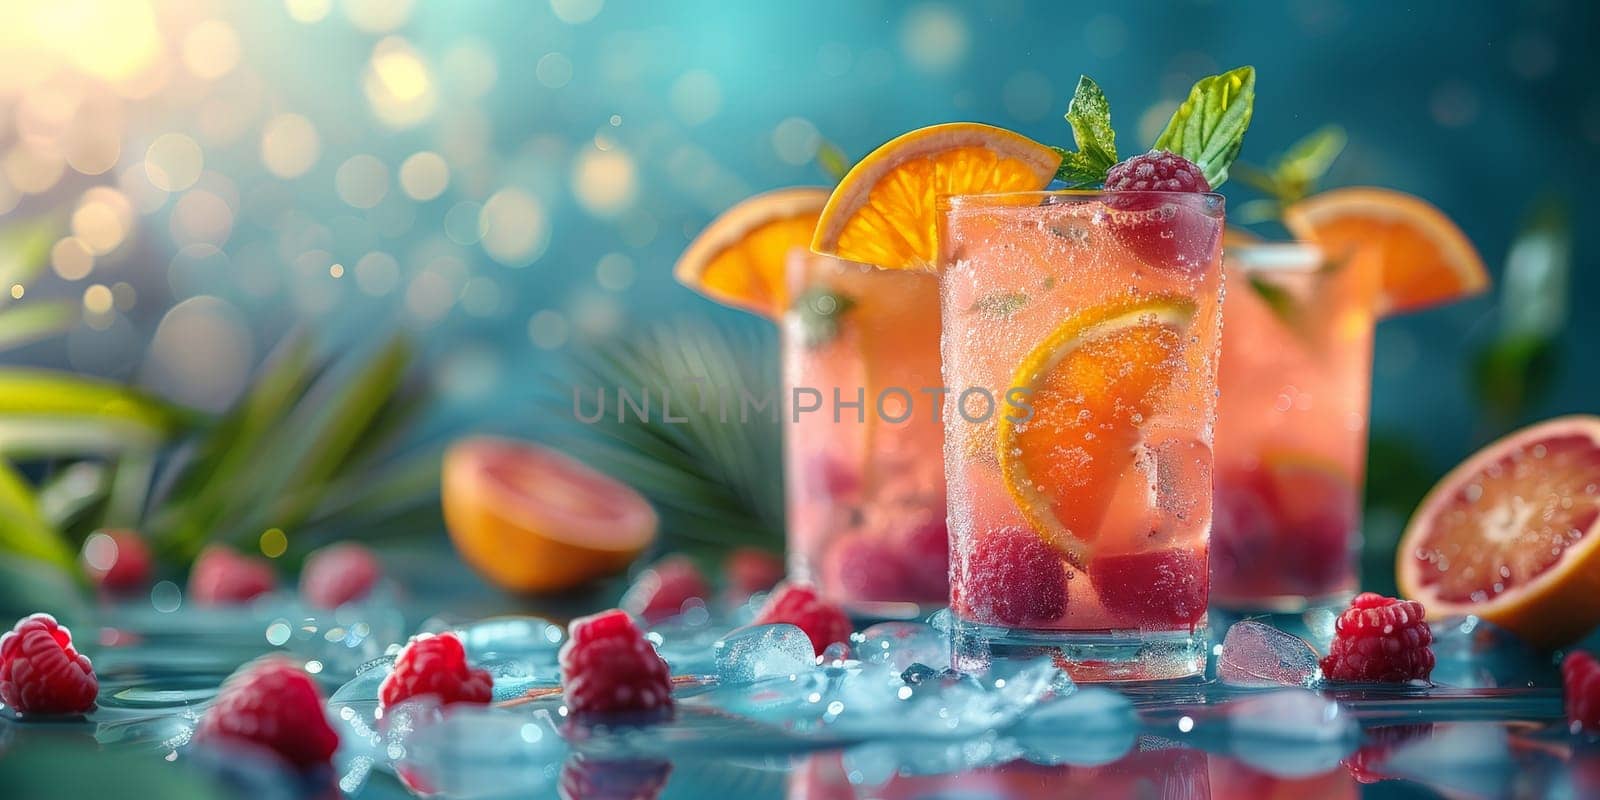 A glass of pink drink with raspberries and oranges by nateemee